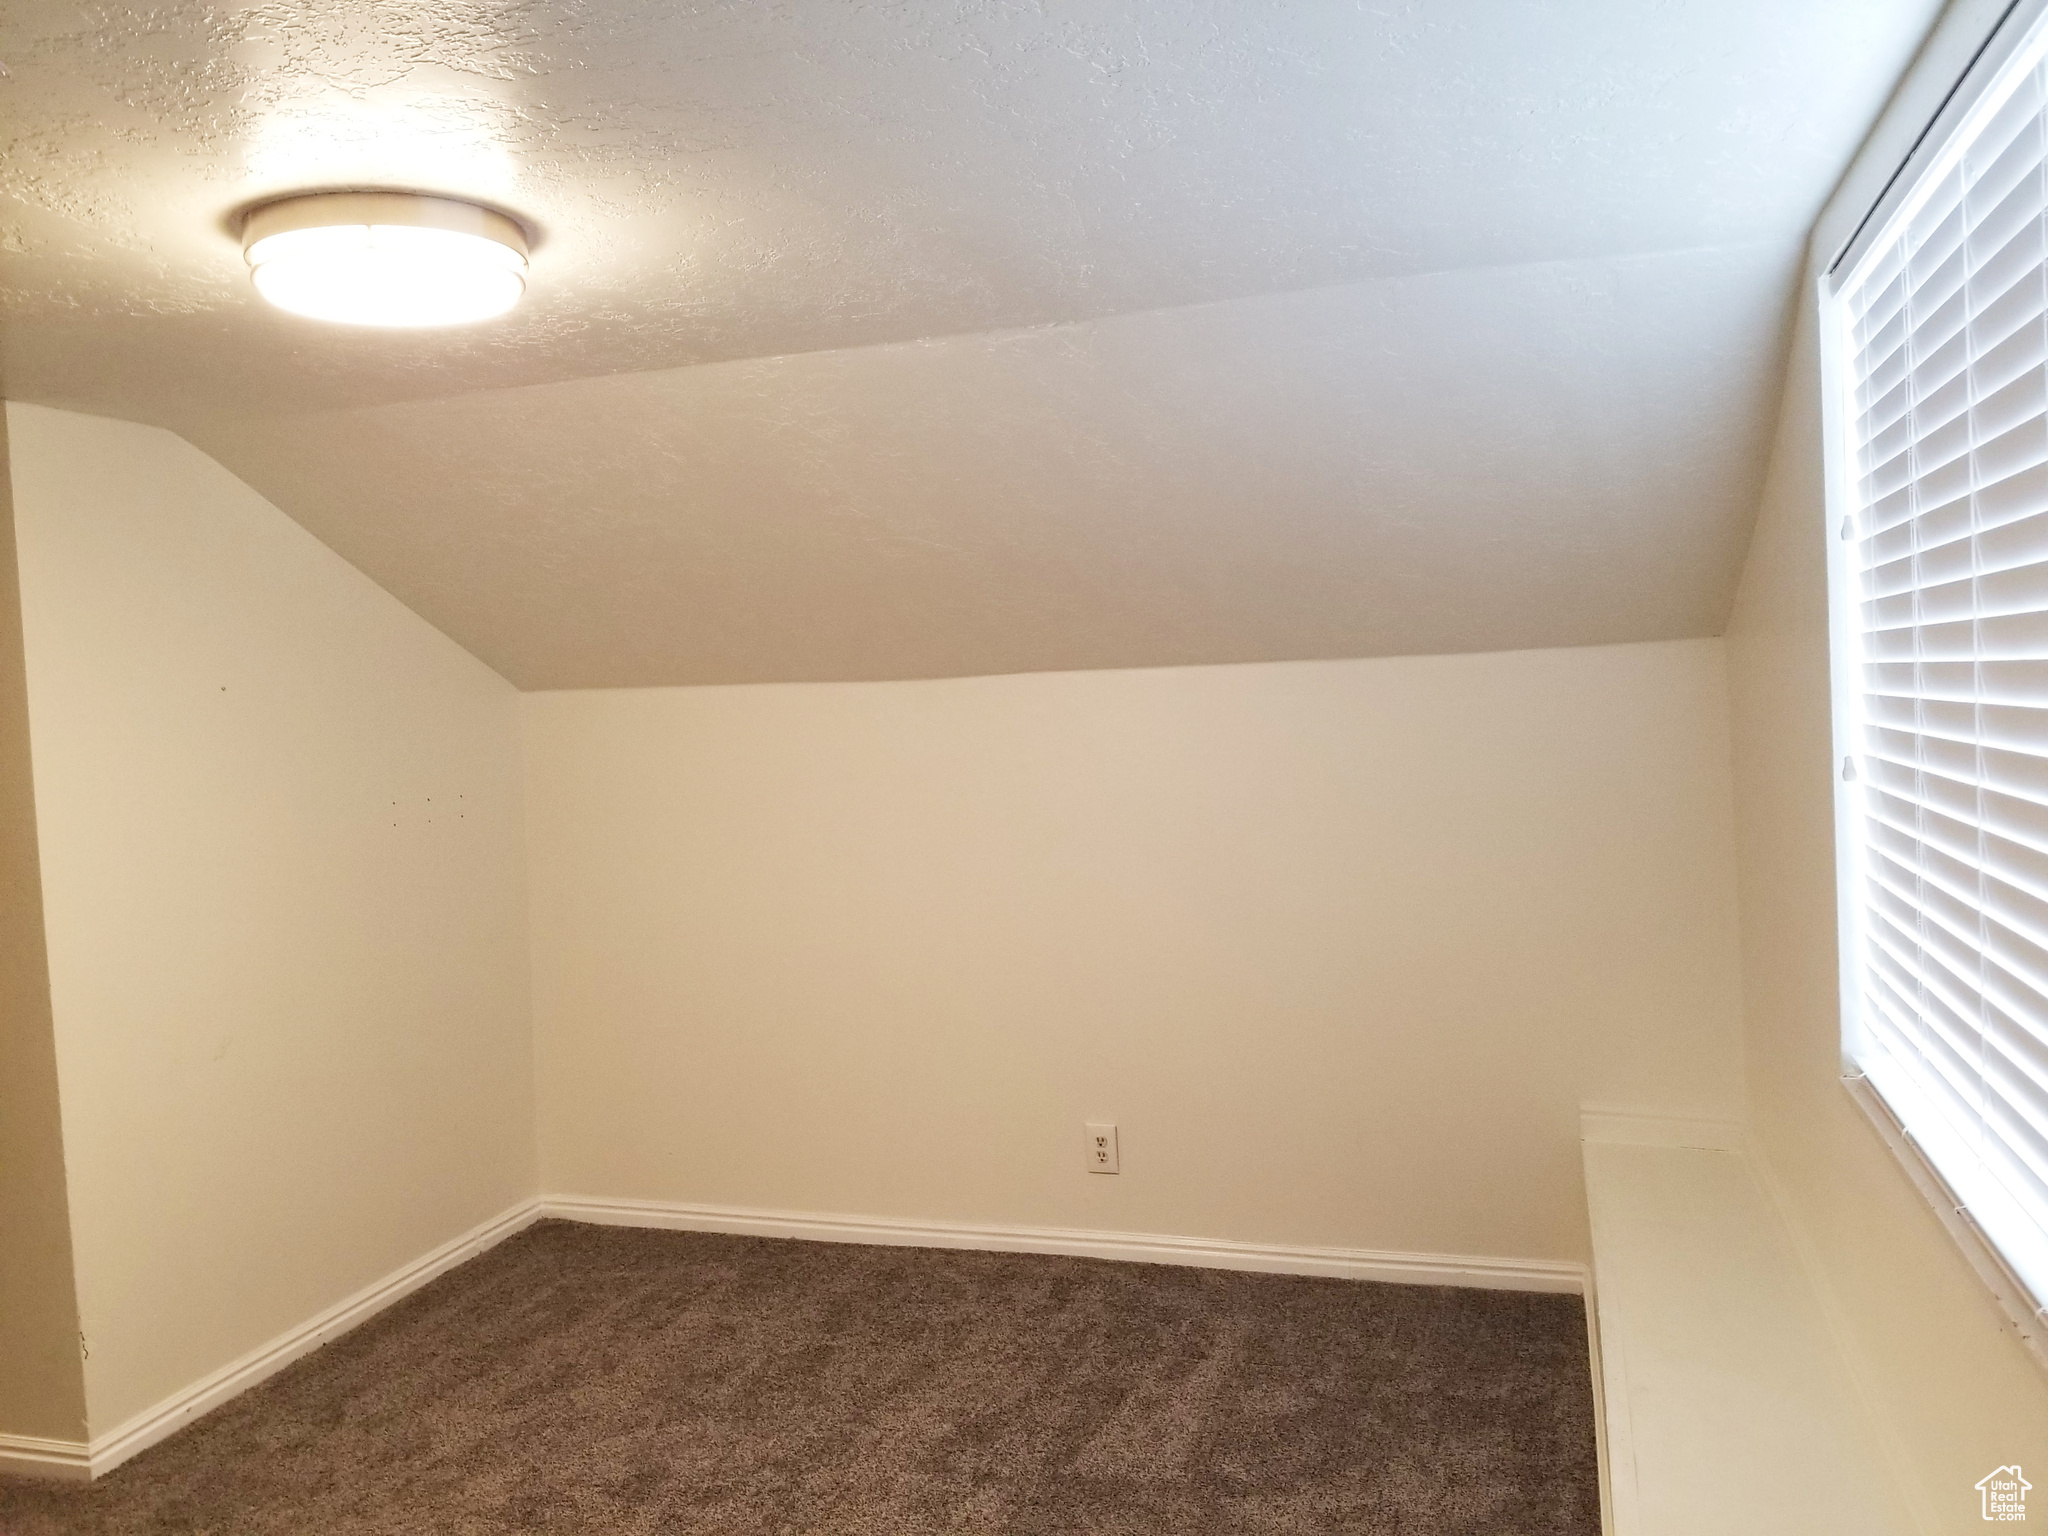 Additional living space with a textured ceiling, dark carpet, and vaulted ceiling